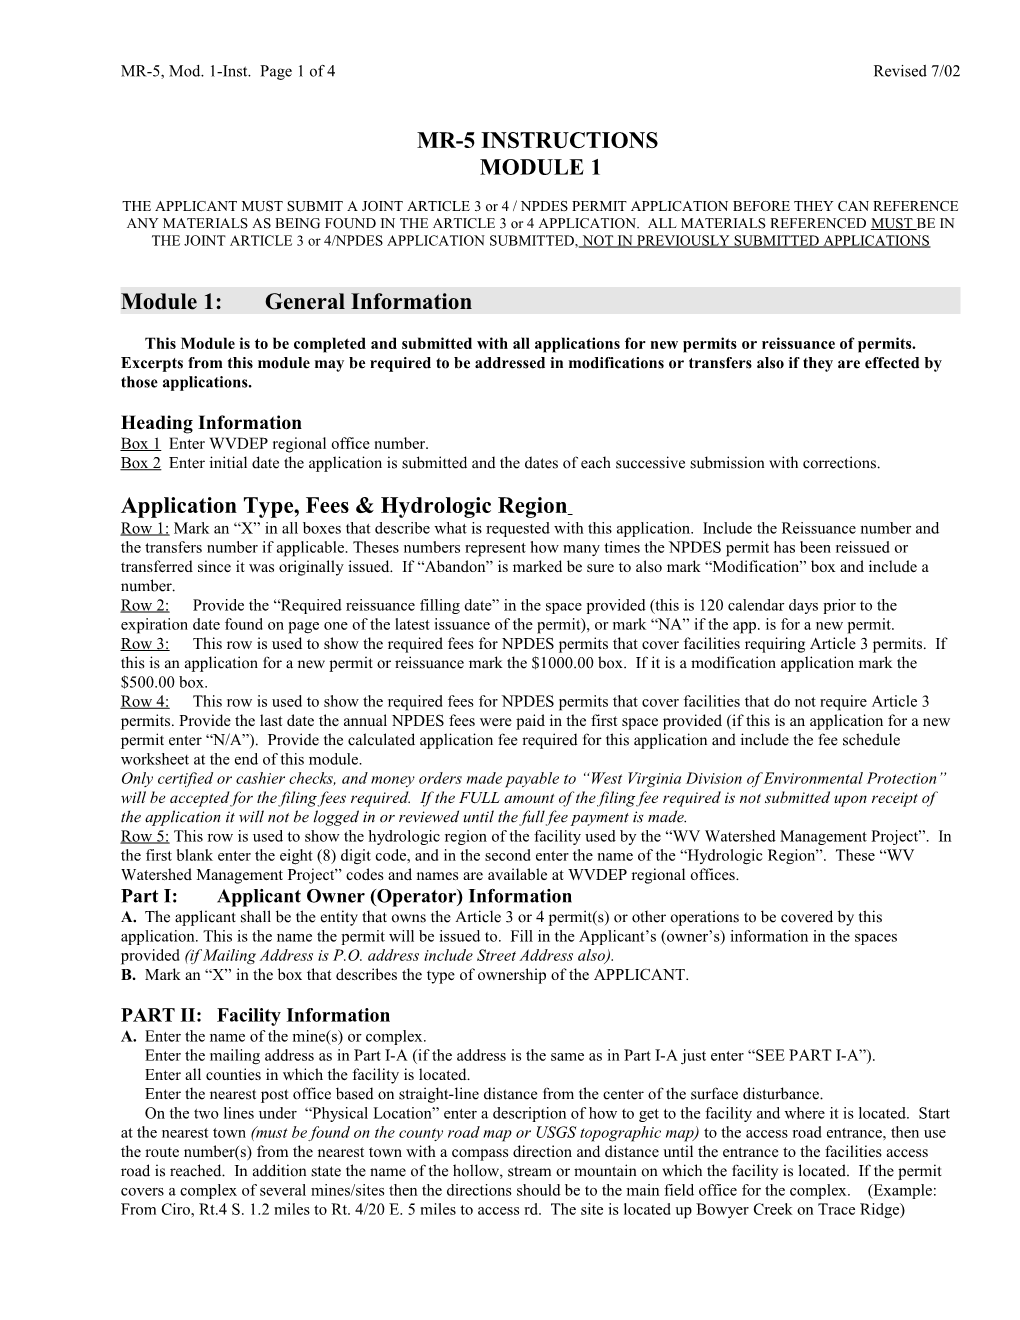 MR-5, Mod. 1-Inst. Page 1 of 4Revised 7/02